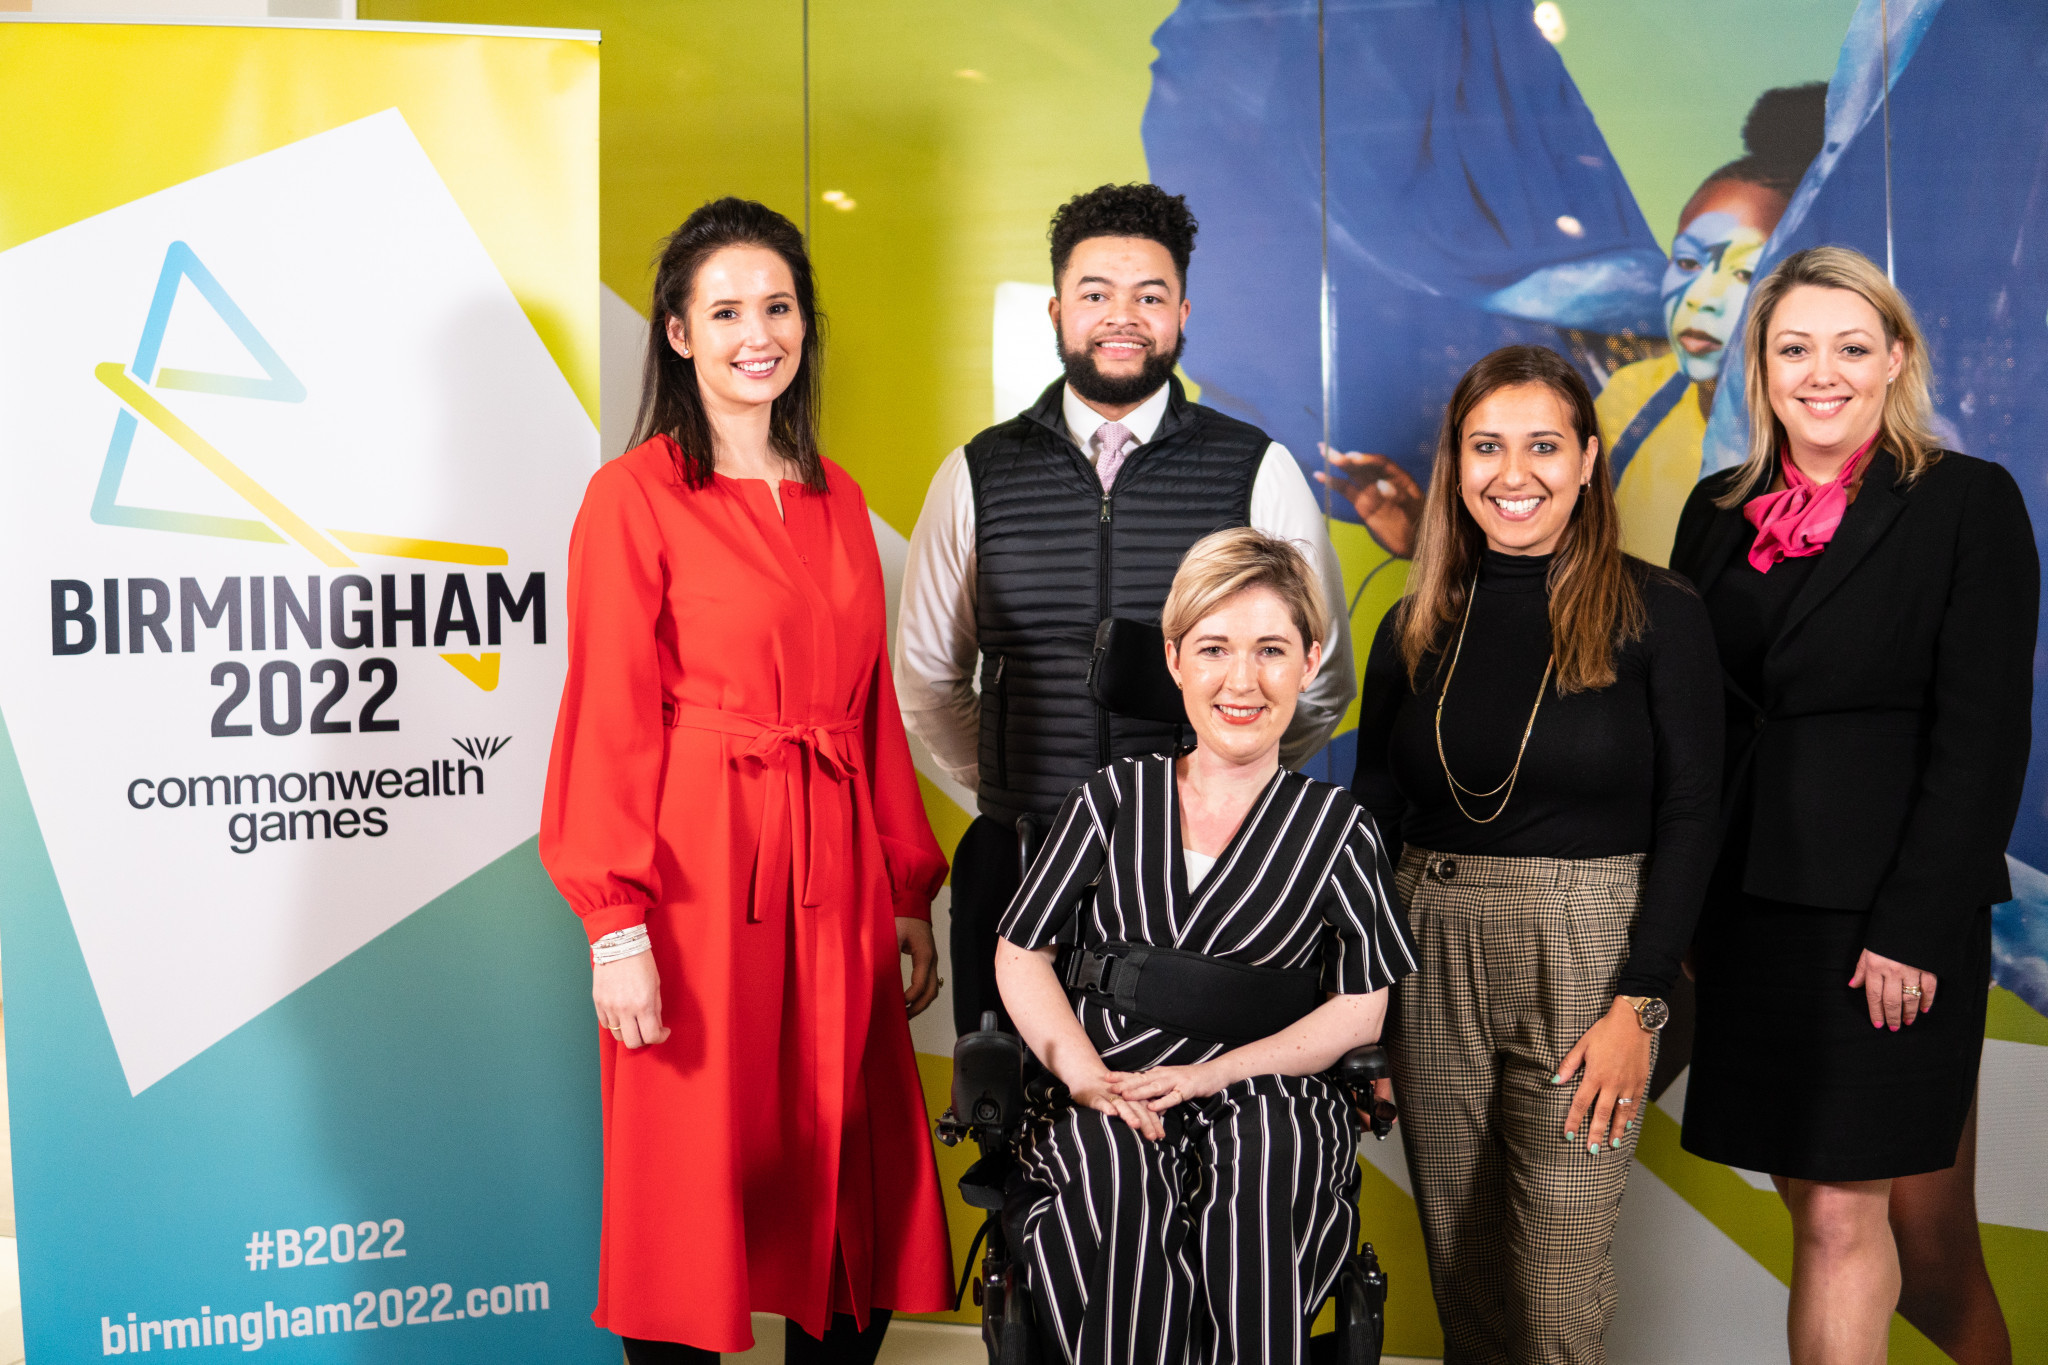 Birmingham 2022 have appointed five new members to its Legacy and Benefits Committee ©Birmingham 2022